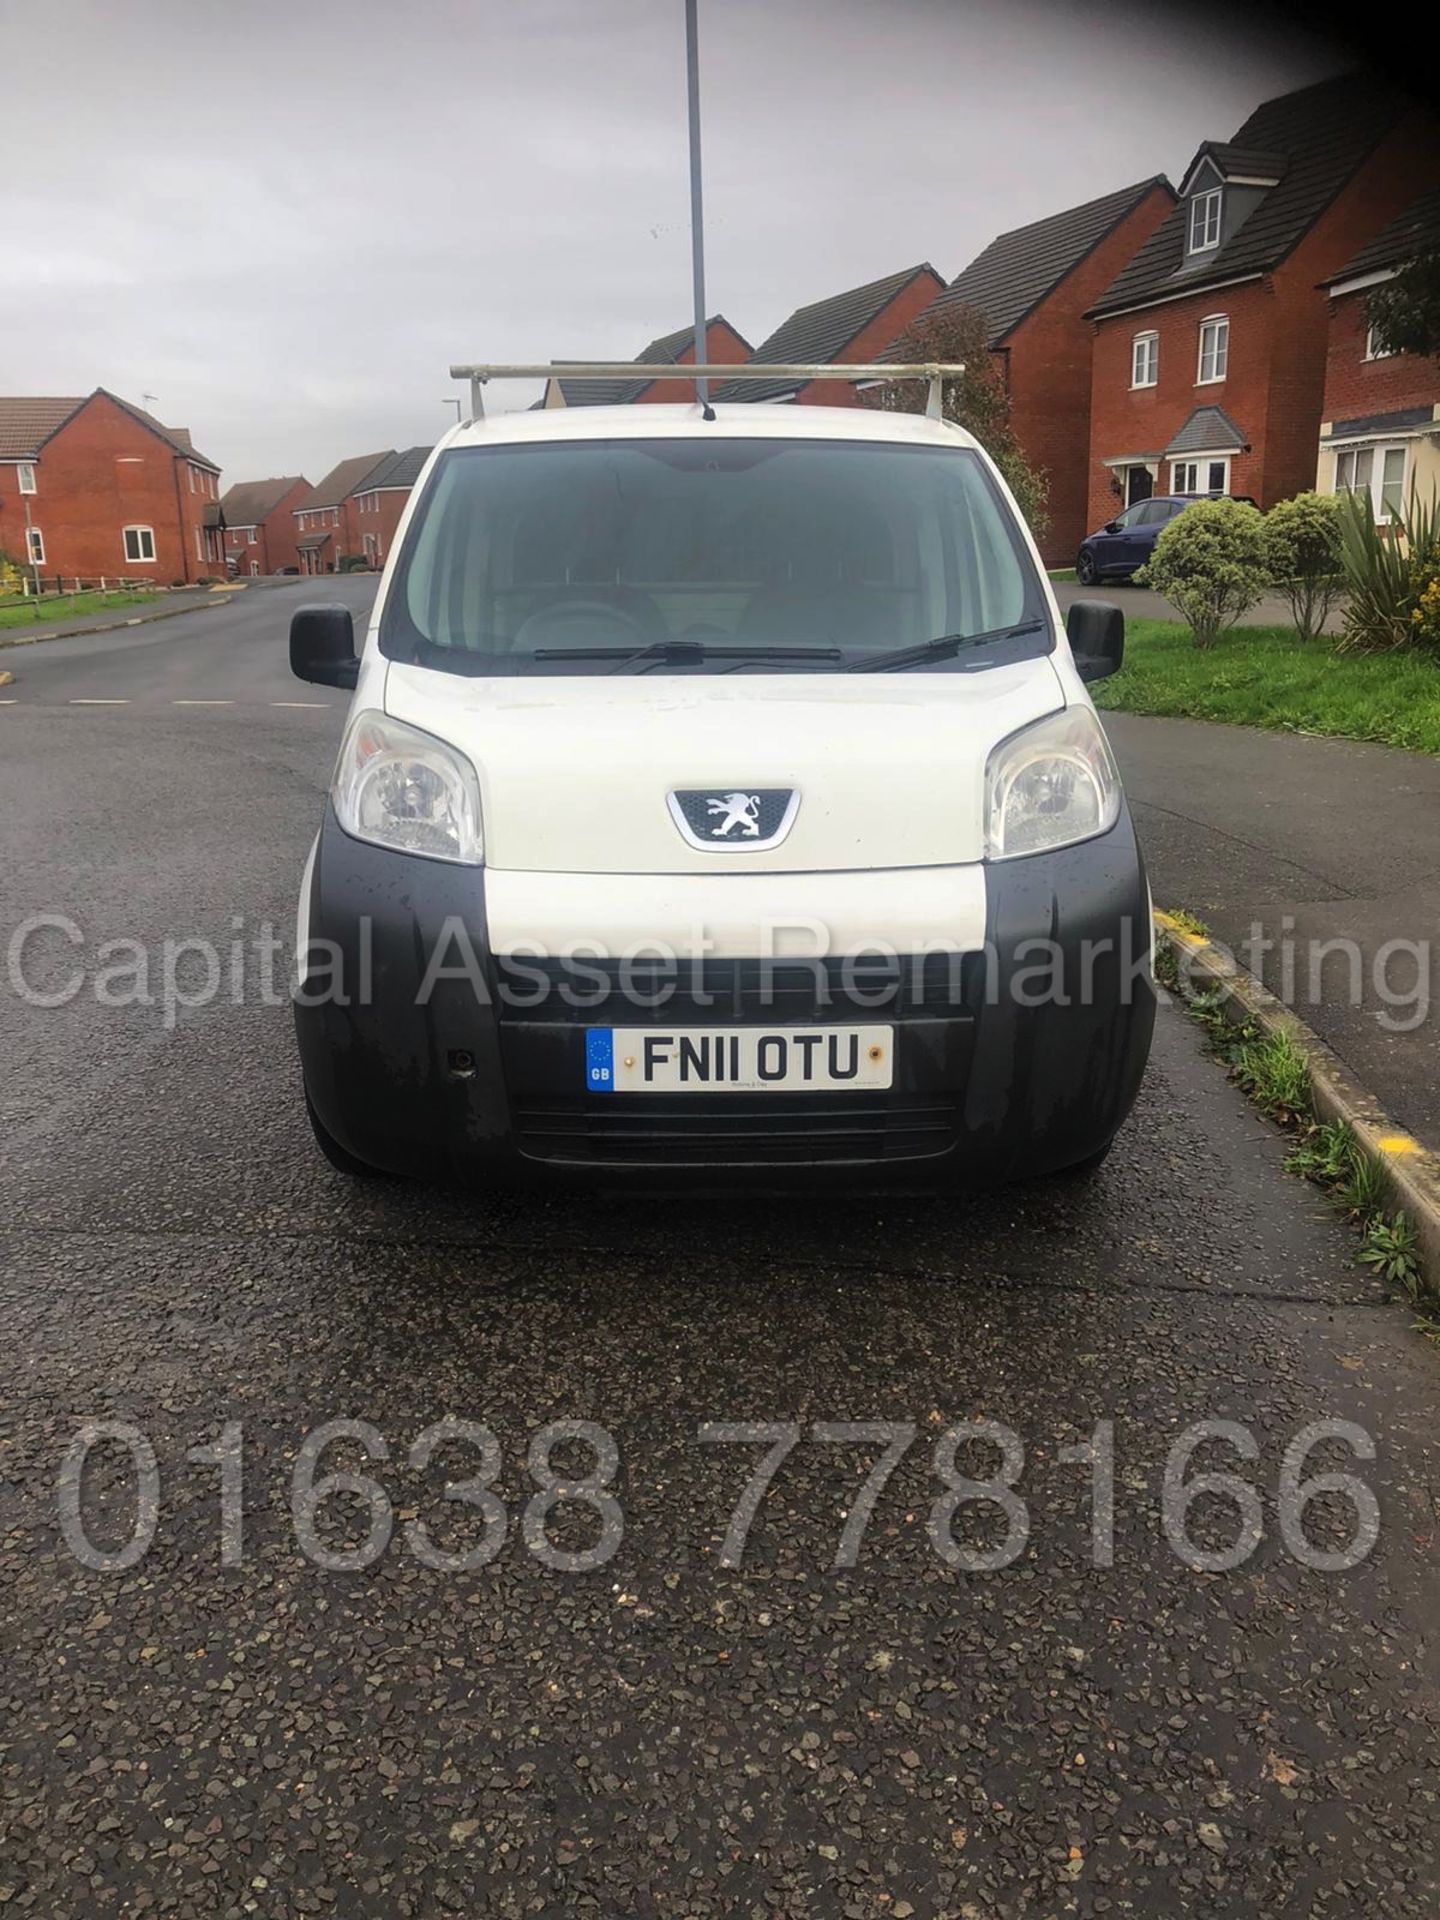 (On Sale) PEUGEOT BIPPER *PROFESSIONAL* LCV - PANEL VAN (2011) '1.4 HDI - 5 SPEED' *AIR CON* - Image 2 of 14